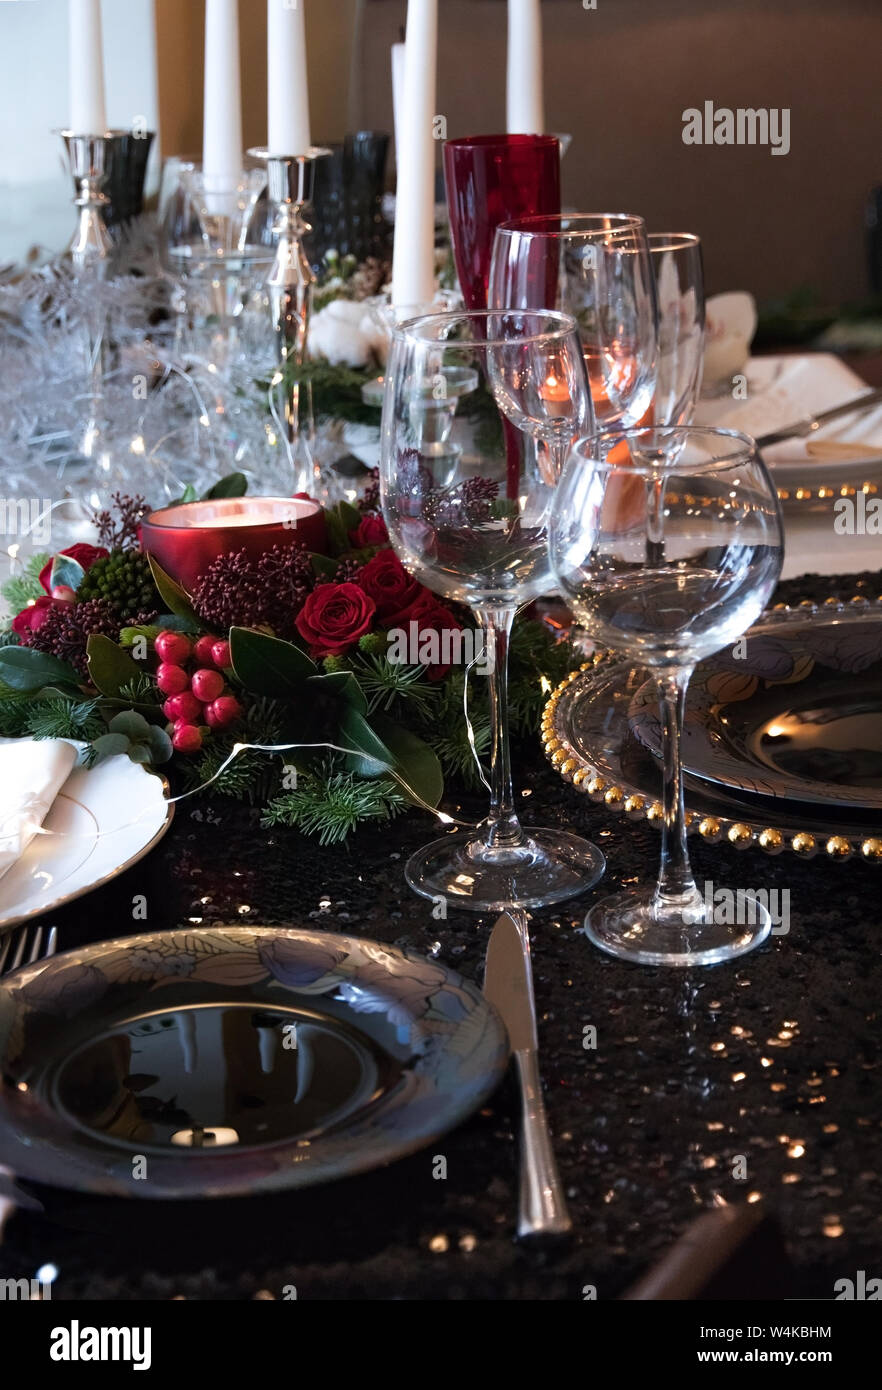 Christmas composition of fir branches, berries and candles on the table.  Festive table setting for Christmas dinner on a shiny black tablecloth and  ex Stock Photo - Alamy